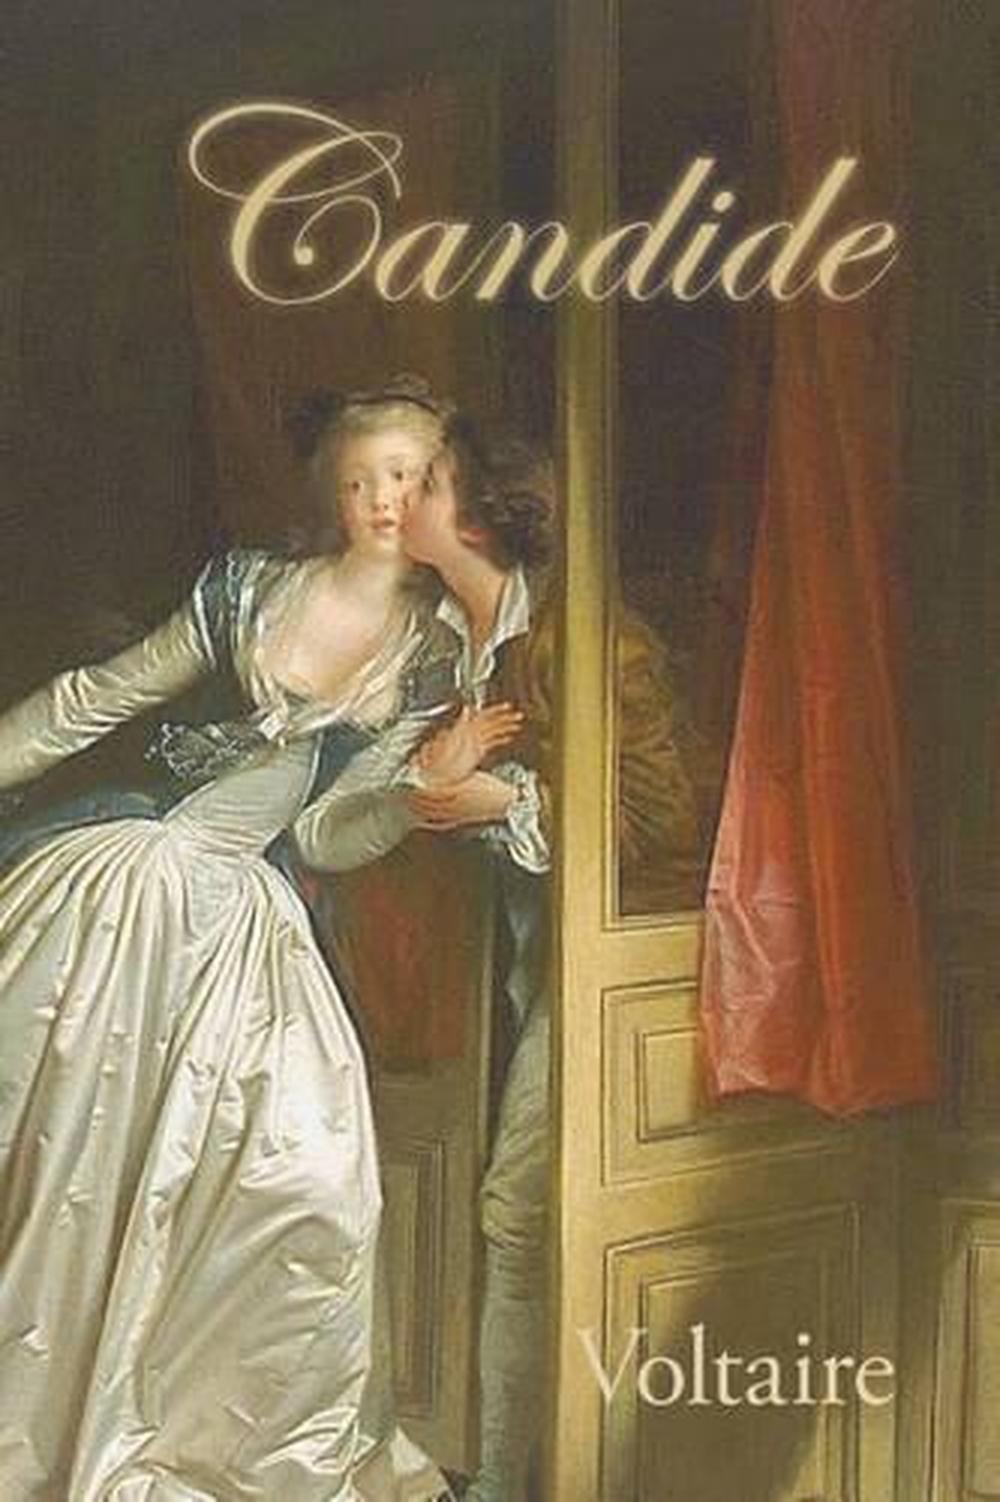 Candide by Voltaire (English) Paperback Book Free Shipping ...